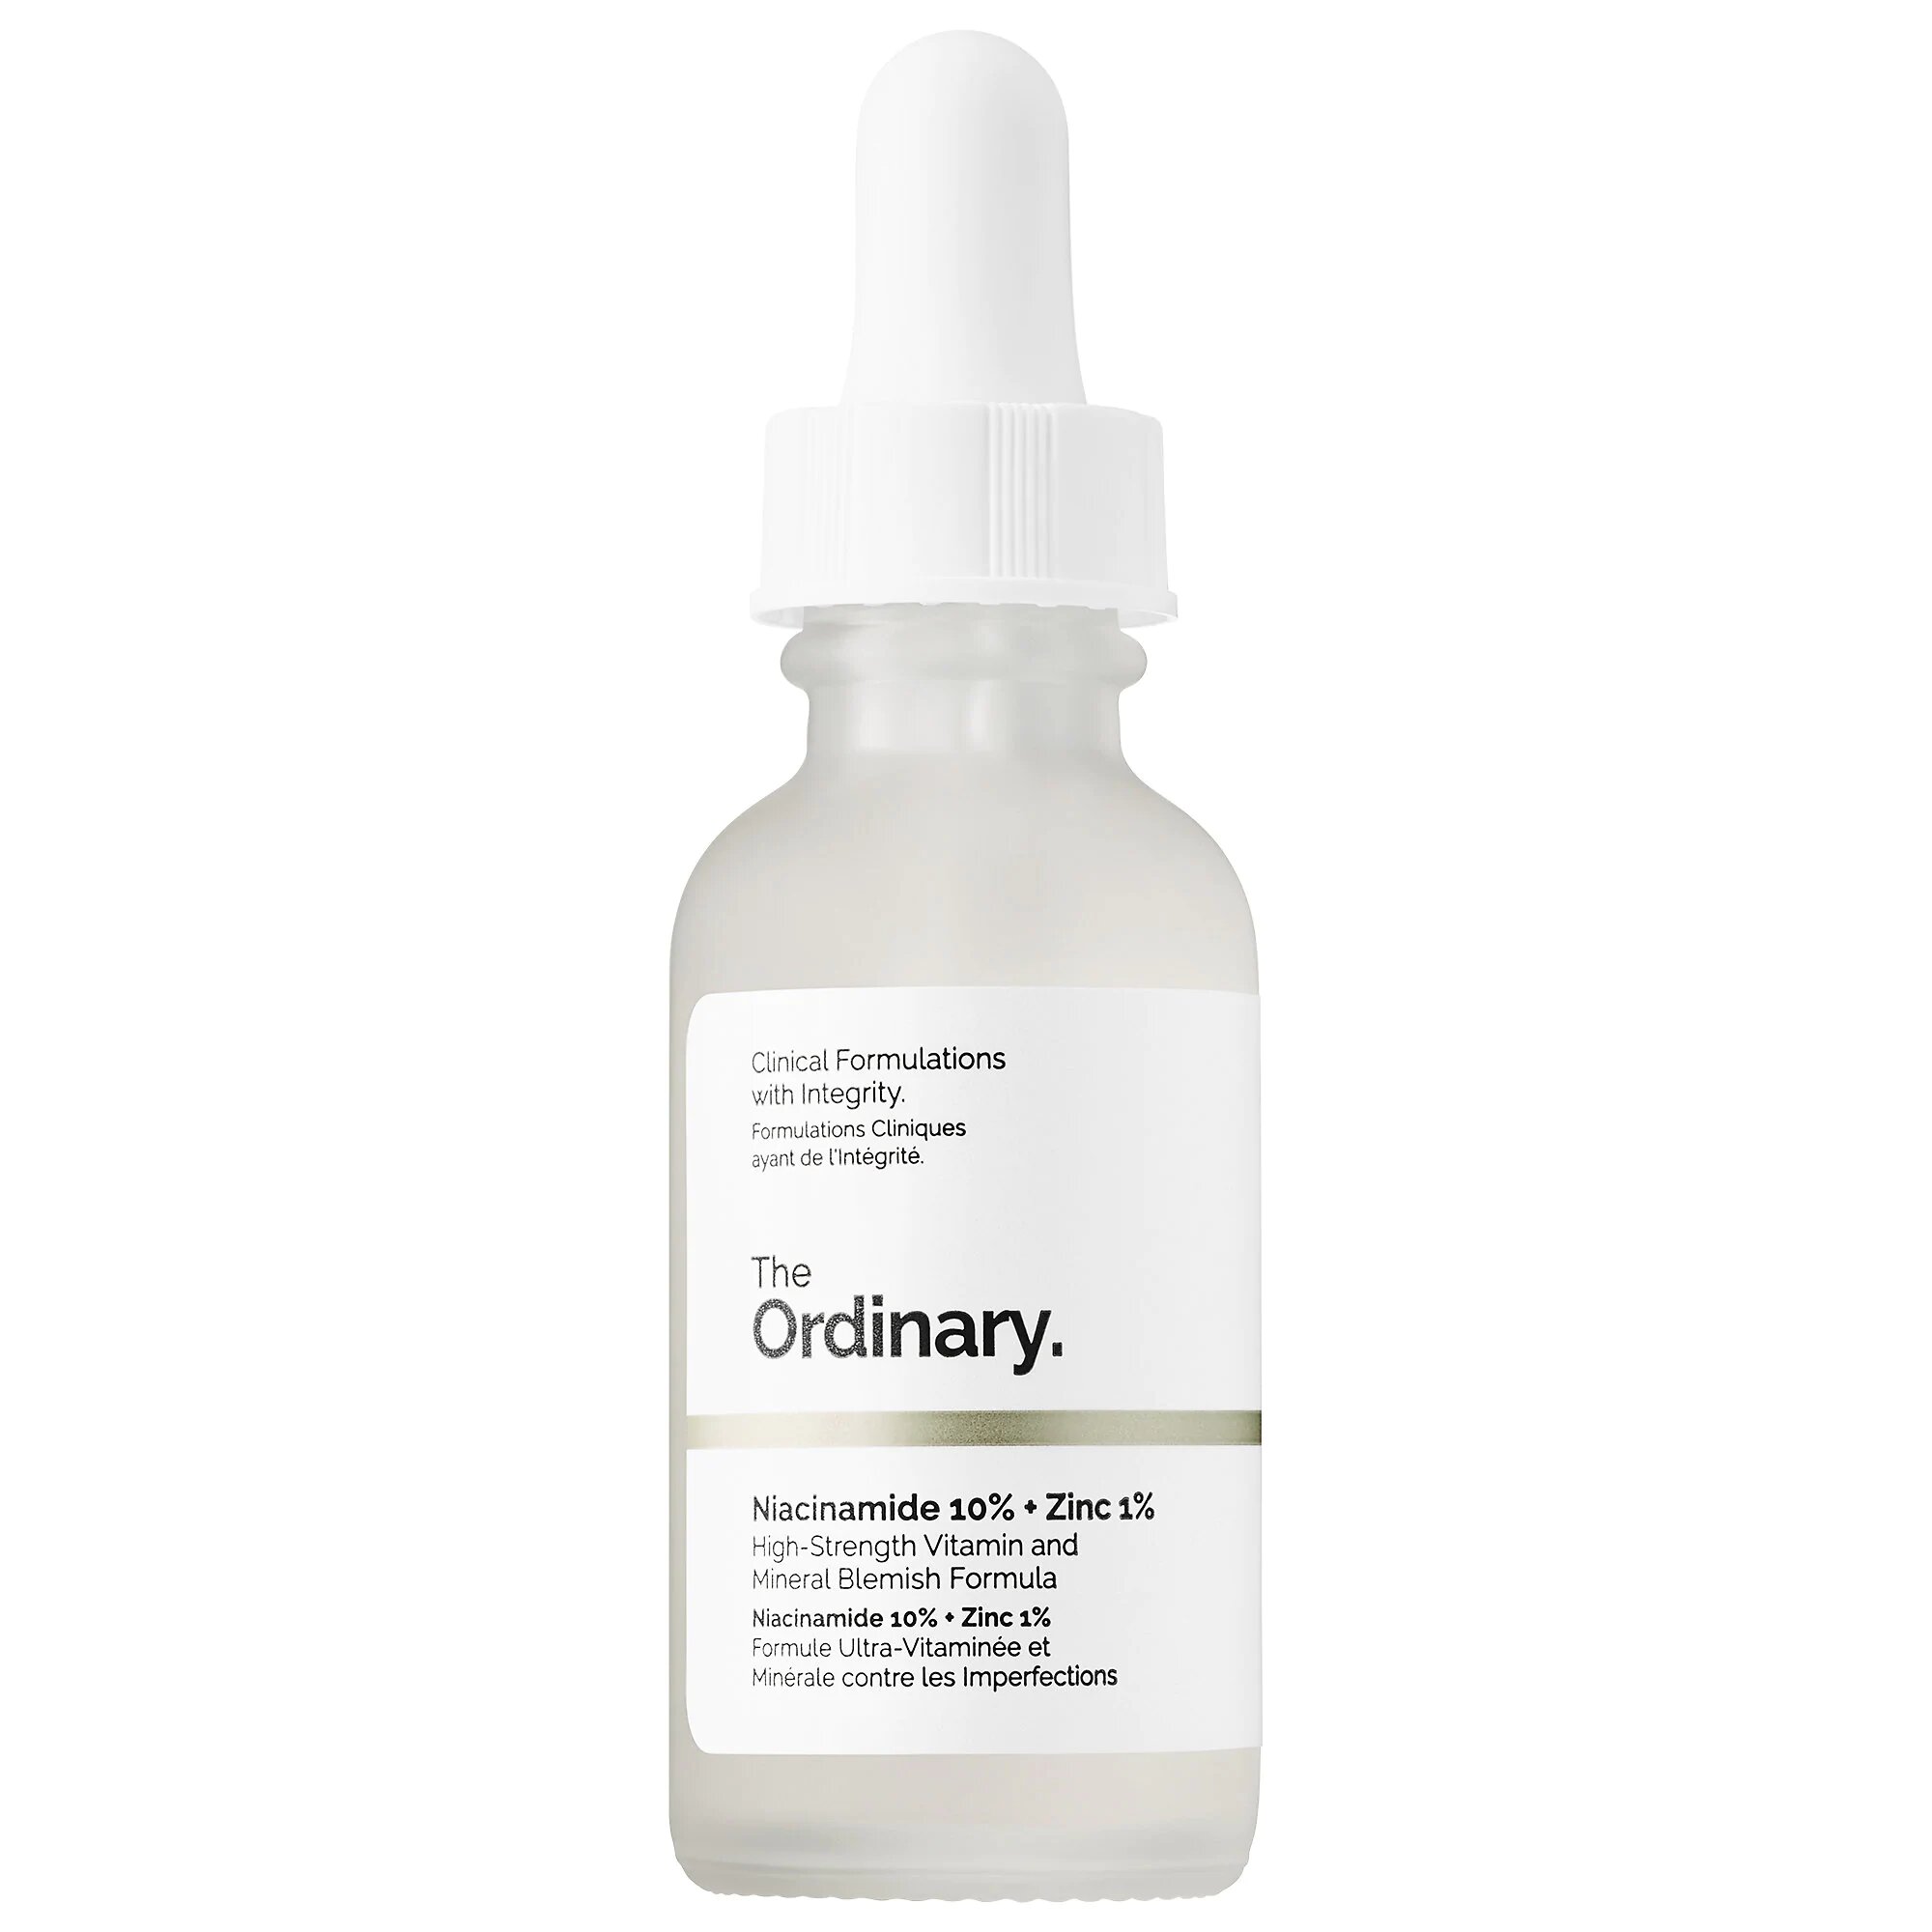 The Best The Ordinary Skincare Product: Niacinamide 10% + Zinc 1%